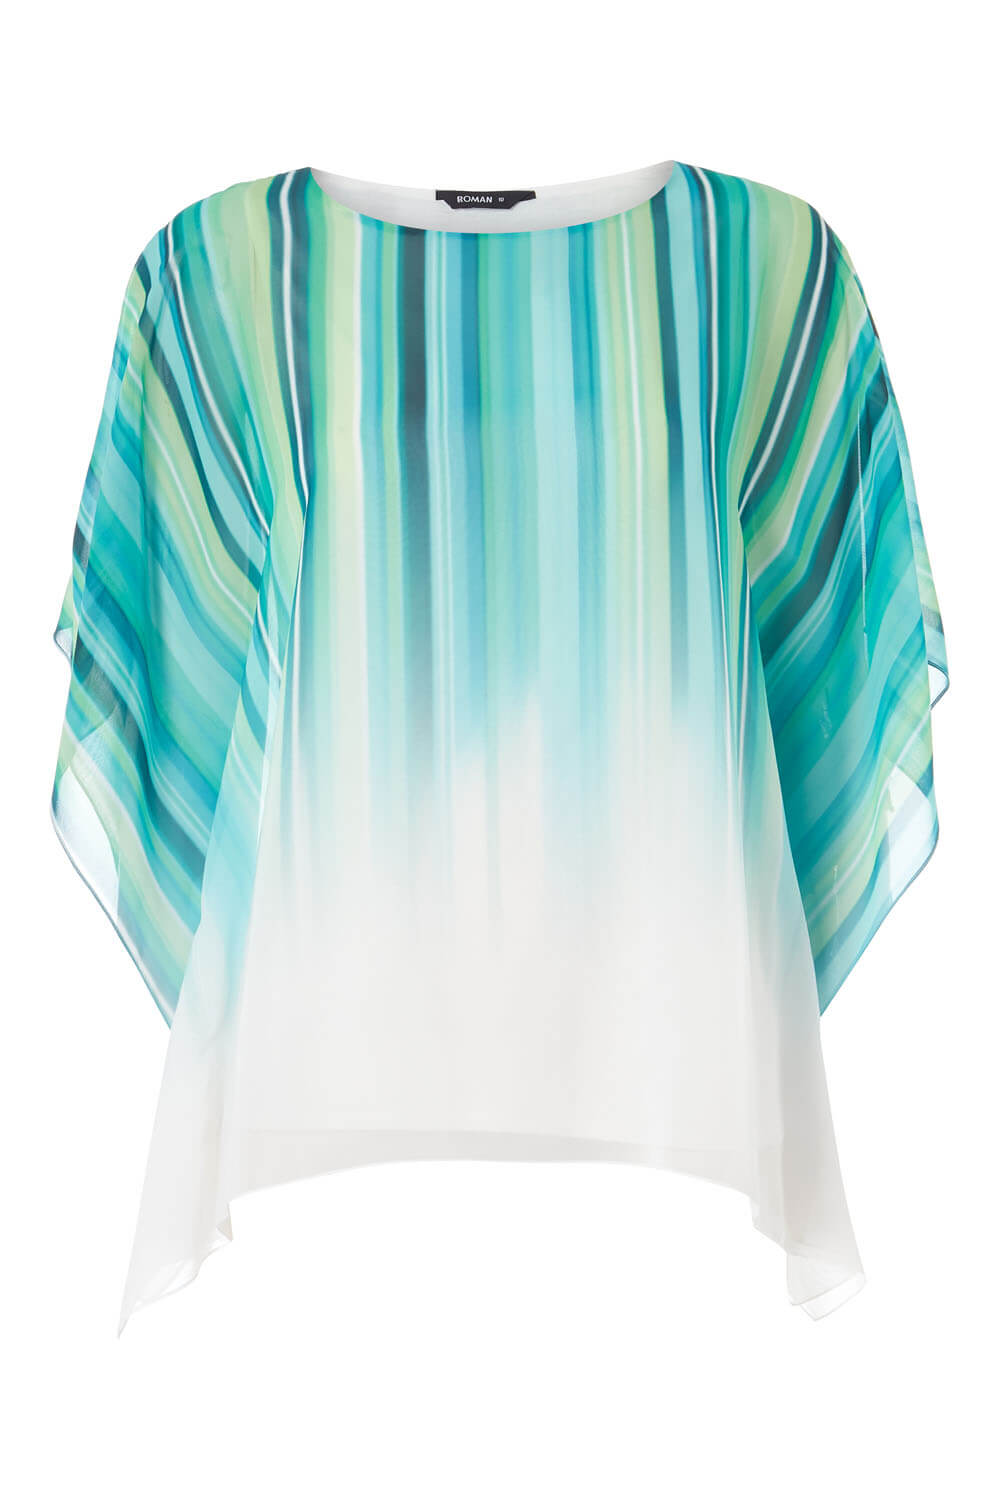 Green Ombre Stripe Print Overlay Top, Image 4 of 4